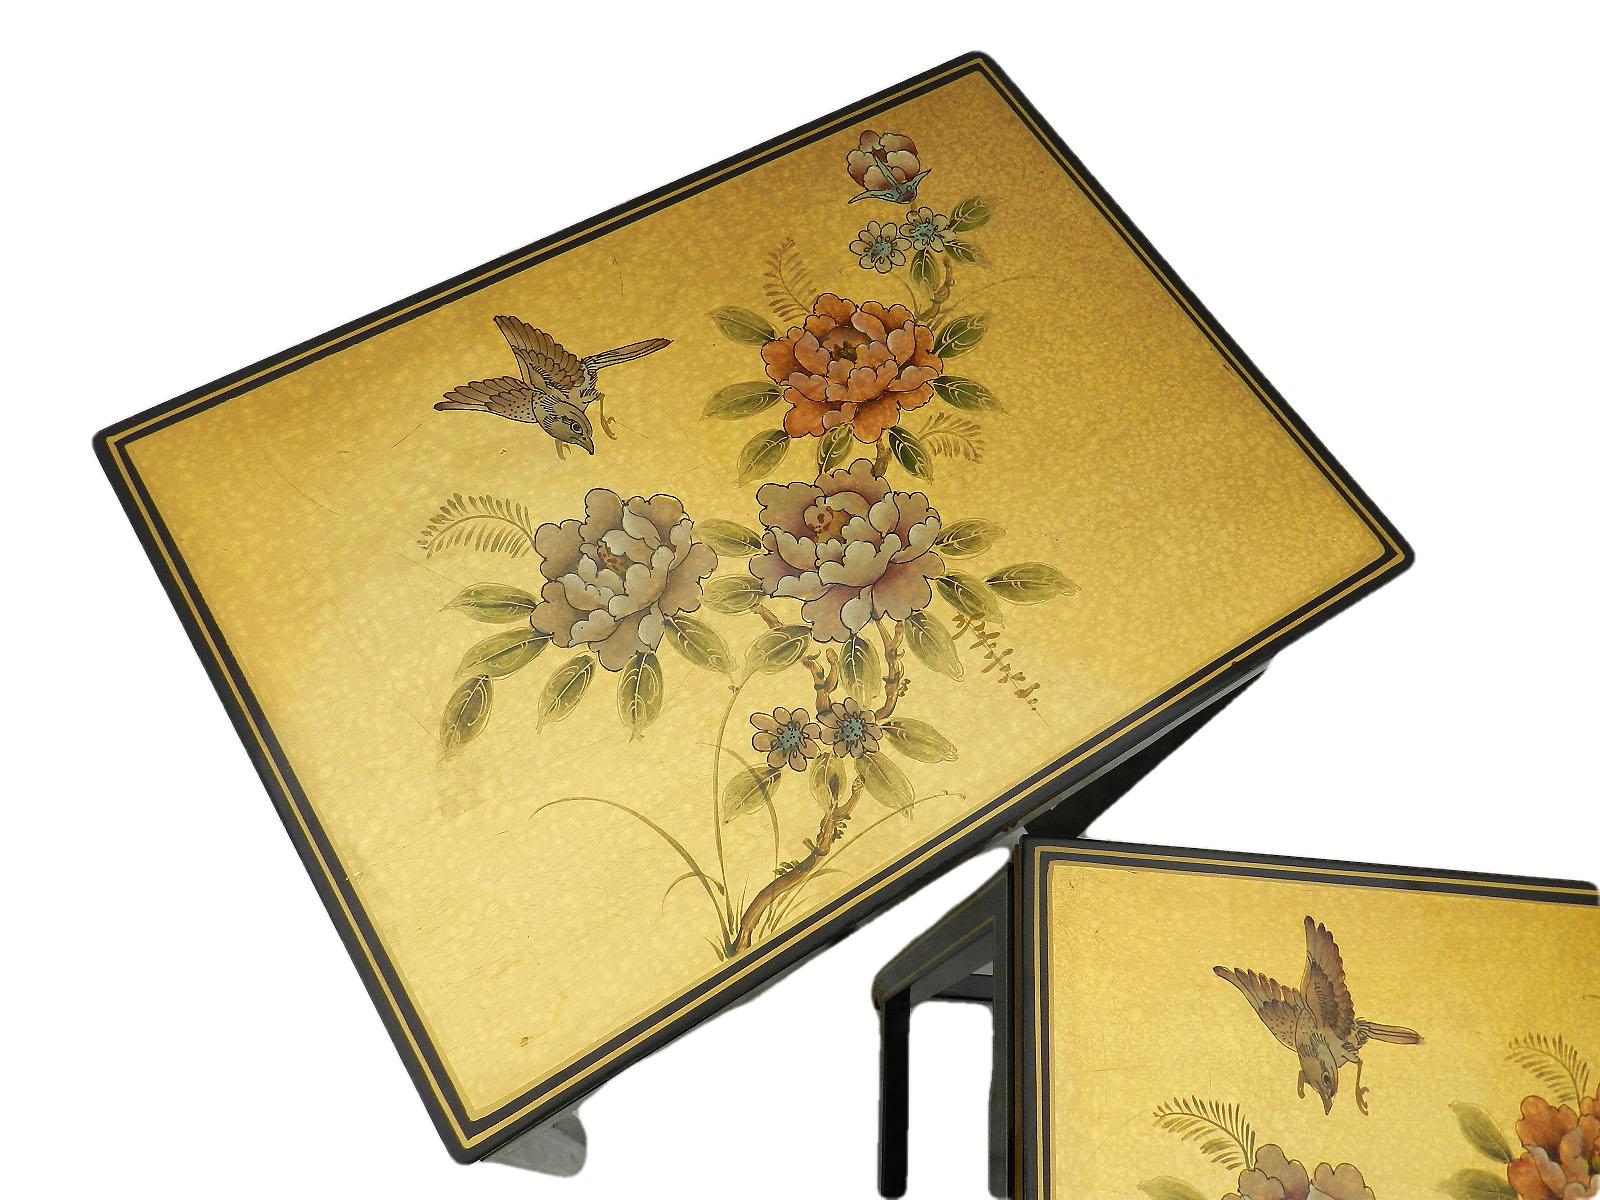 Chinese Chinoiserie Nesting Tables Black Lacquer Decorative Gold Birds Flowers